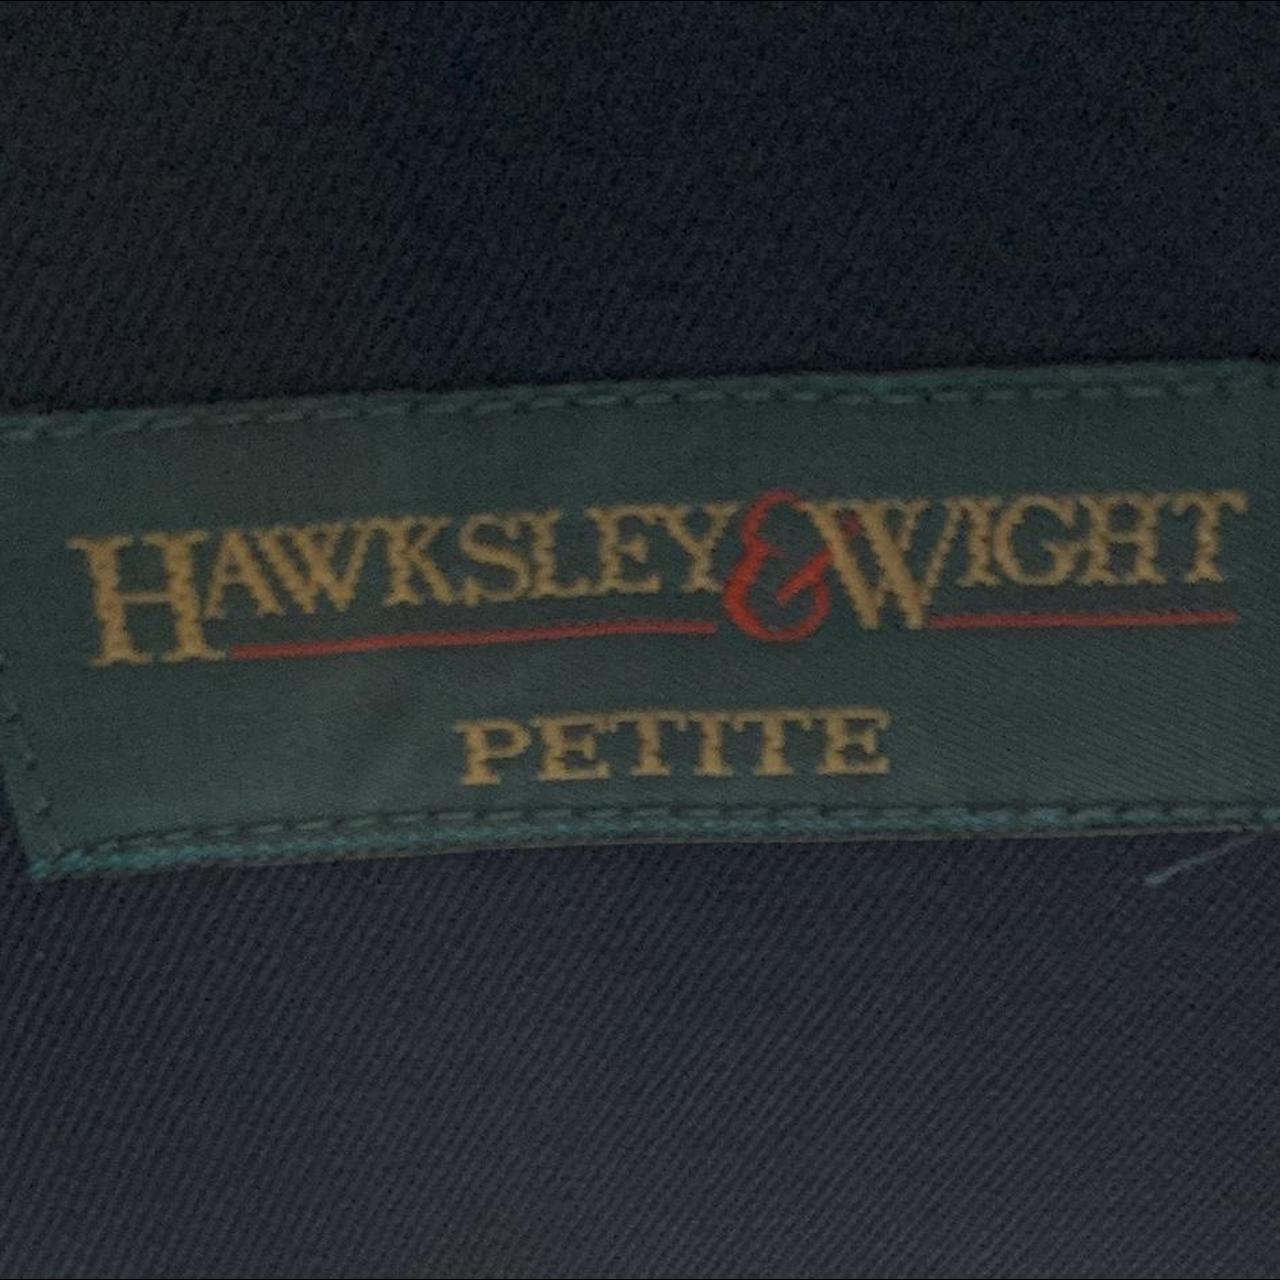 Hawke & Co. Women's Red and Blue Tailored-jackets (3)